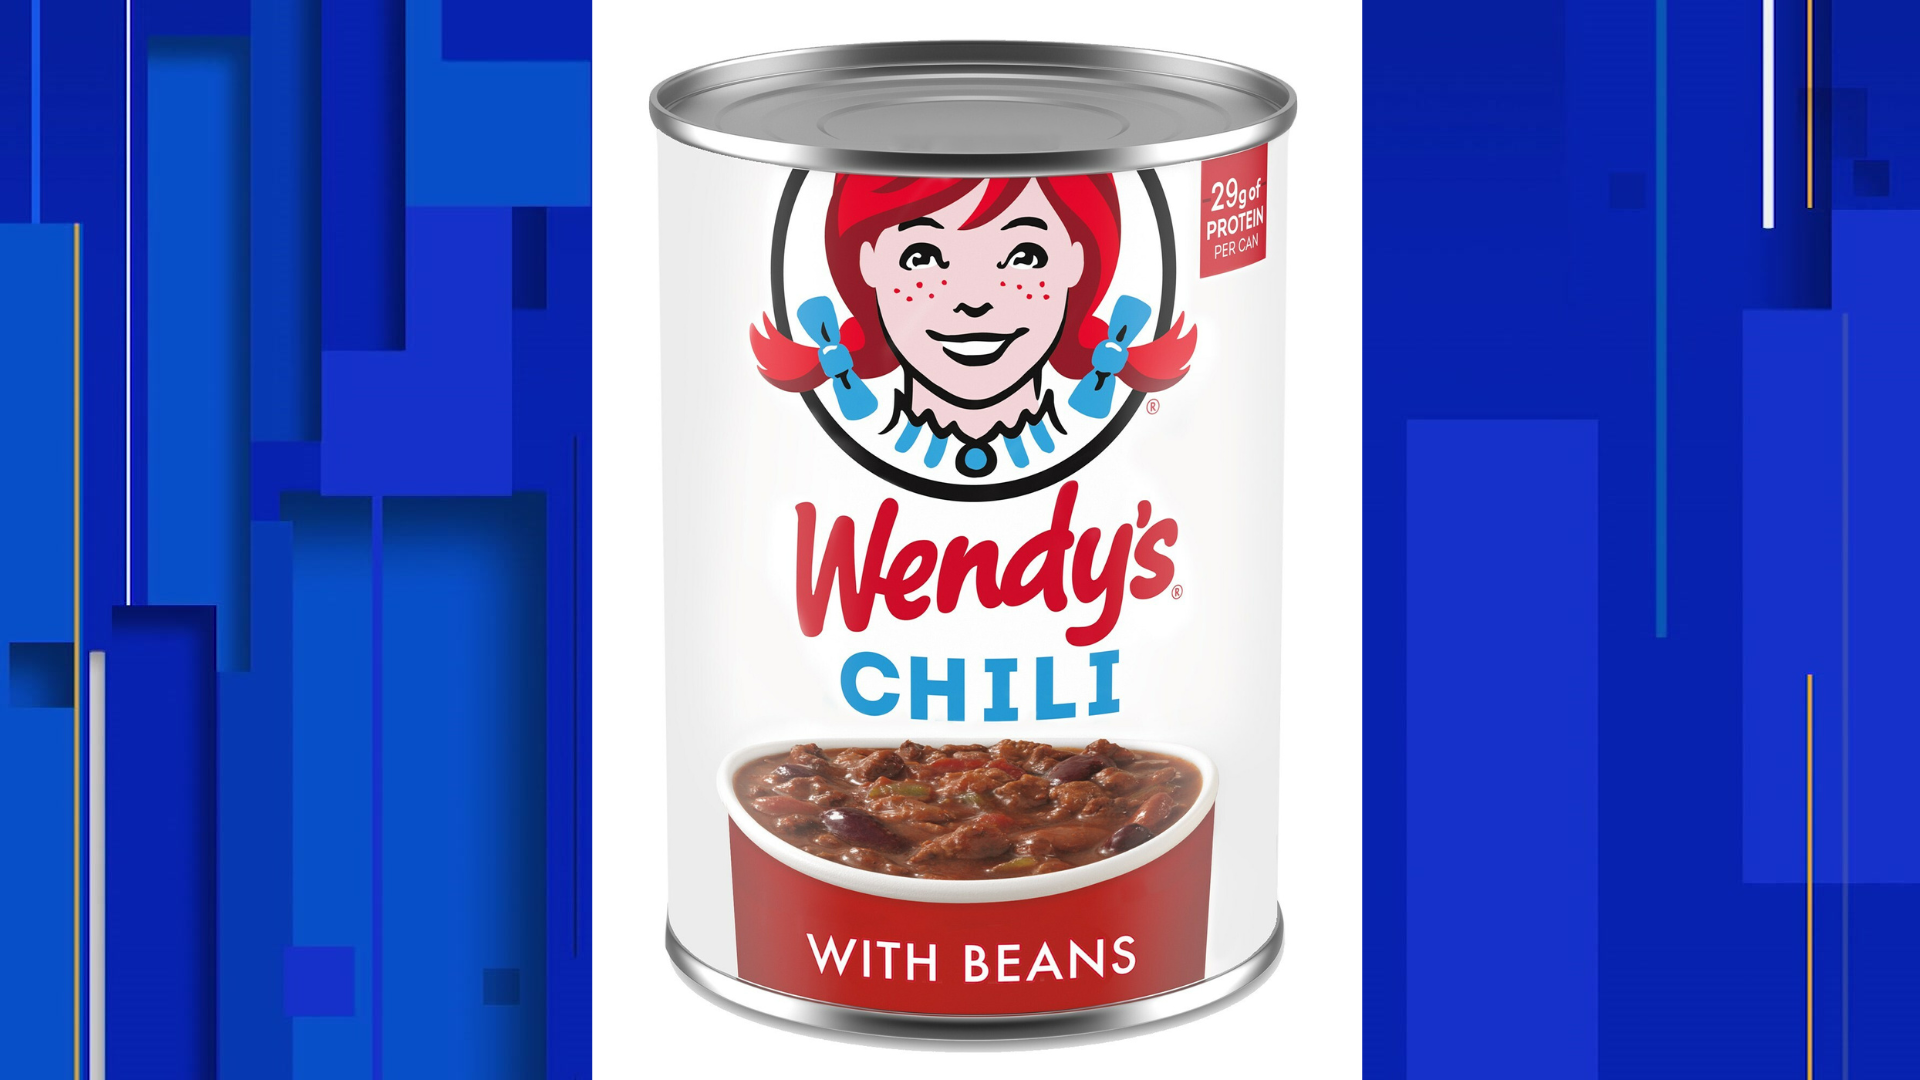 Wendy's chili to be sold in cans at grocery stores